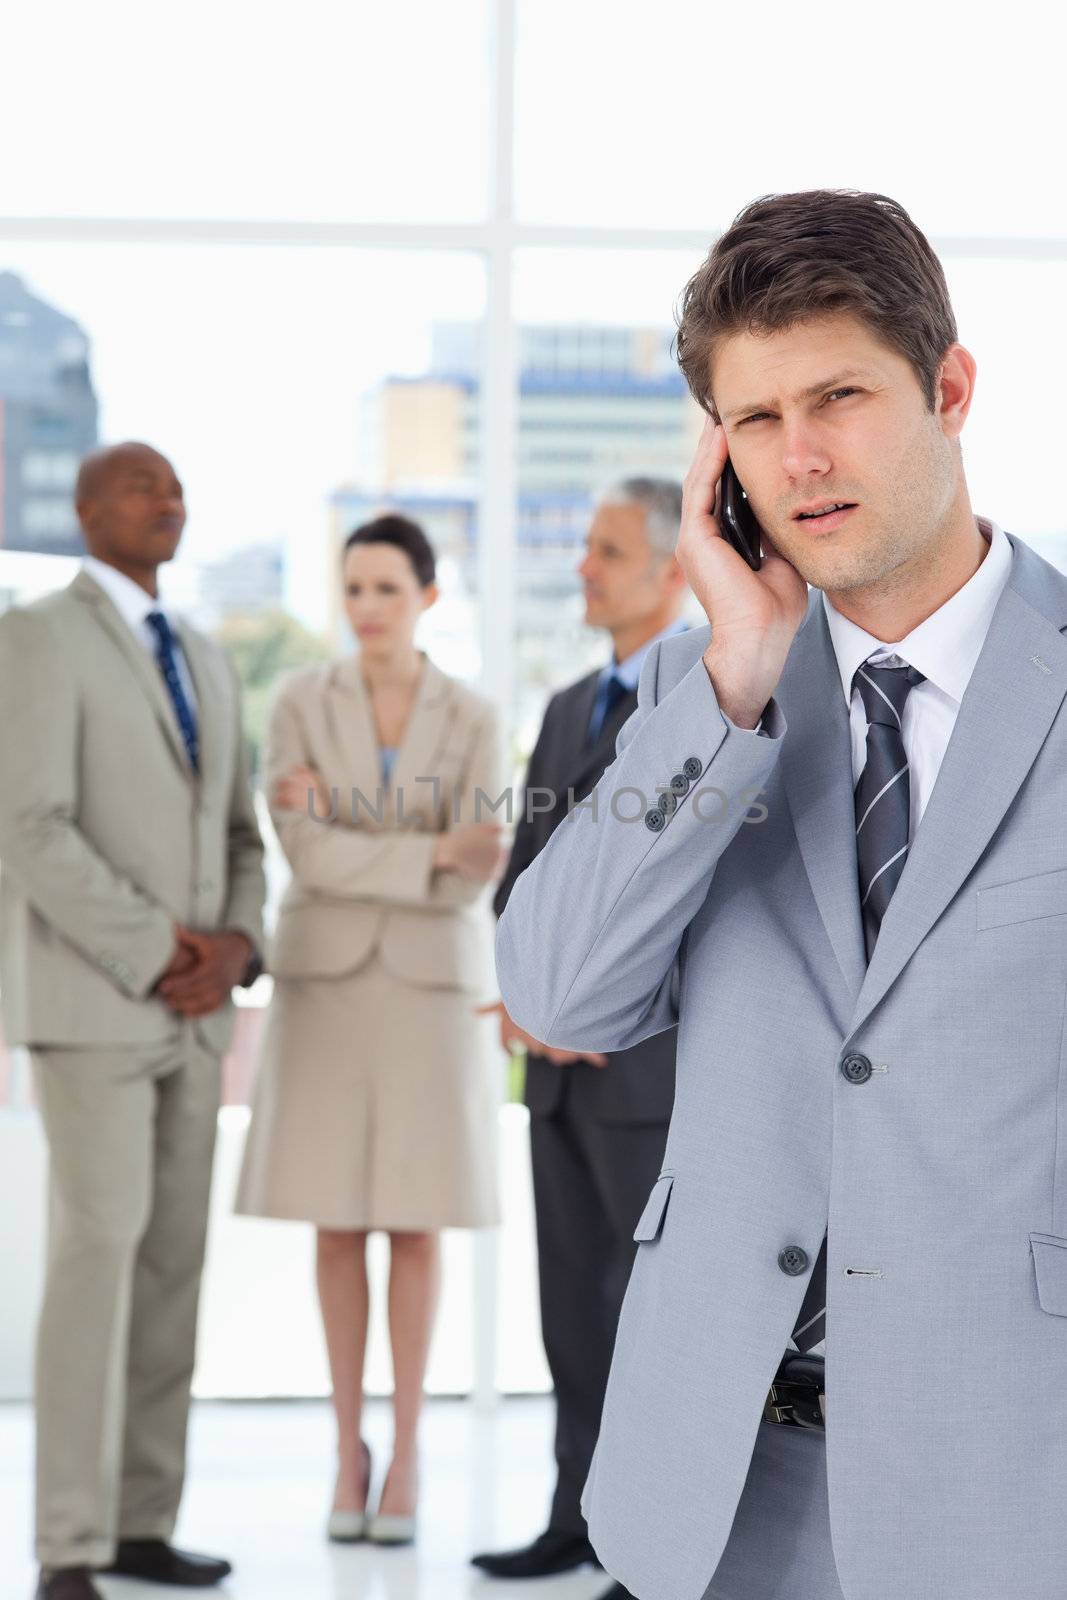 Young executive using a cell phone while his team is behind him